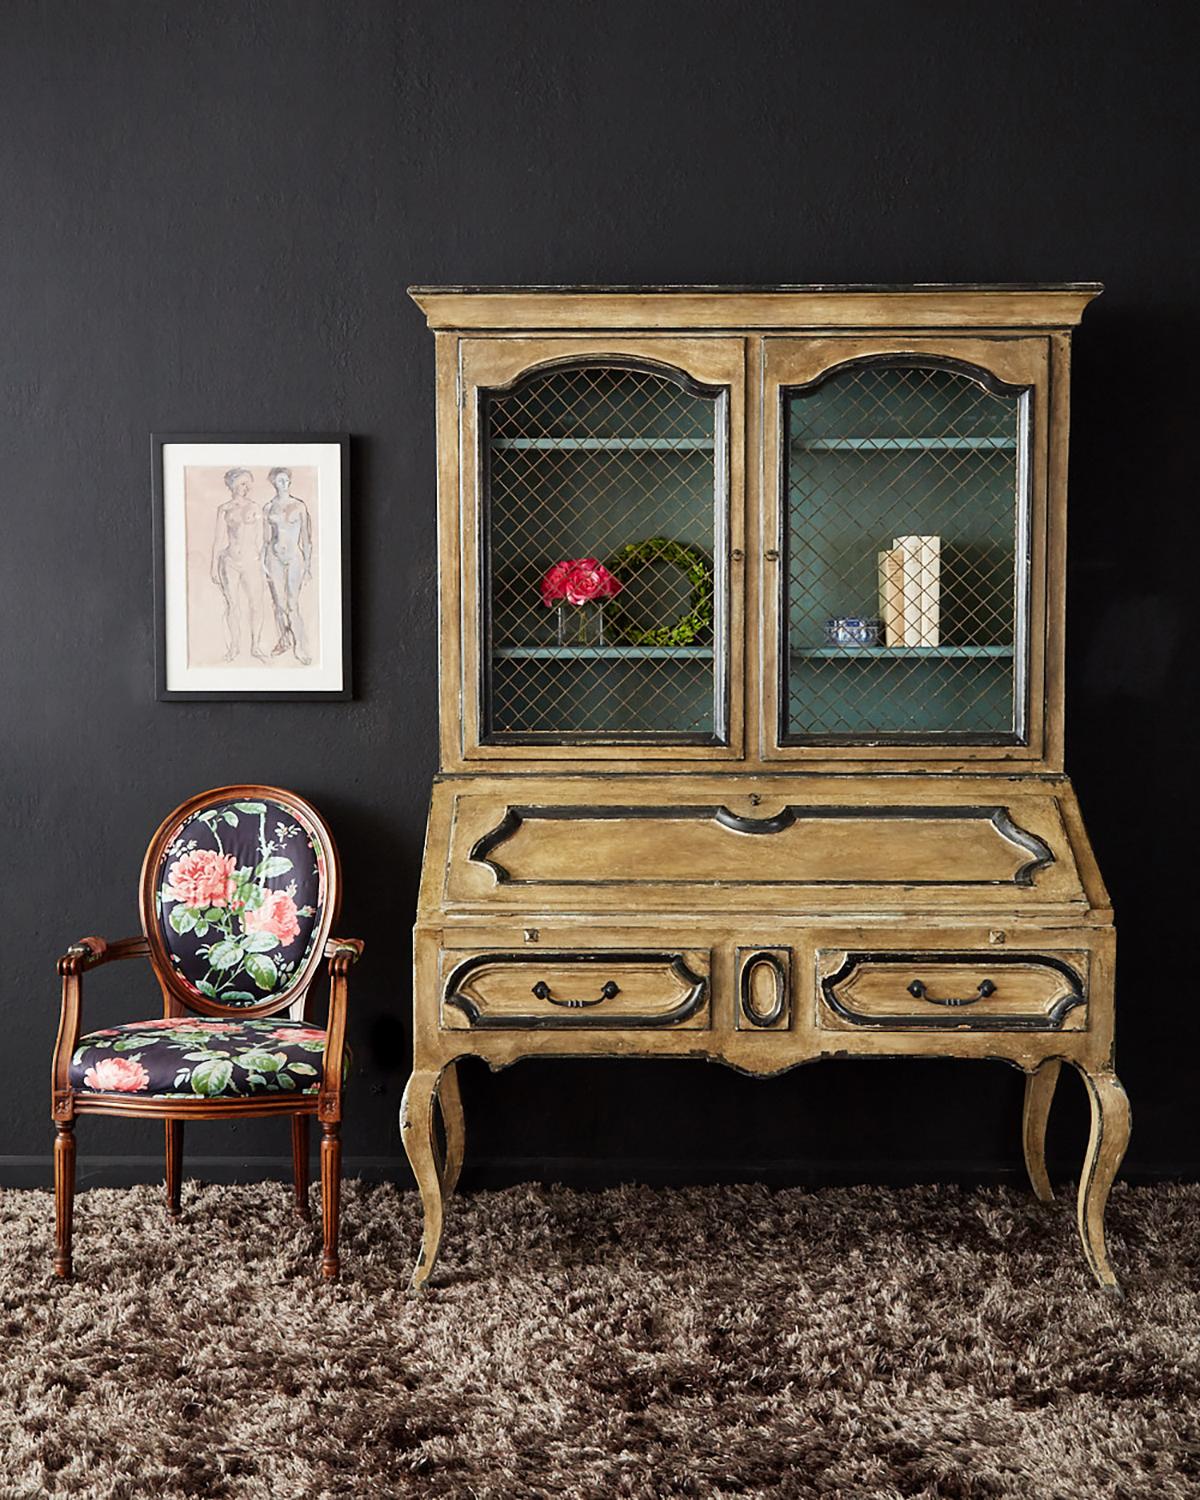 Remarkable two-part secretaire bookcase featuring a slant drop front desk. Made in the Swedish Gustavian taste with a gorgeous painted lacquer finish having a distressed patina. The bookcase has three shelves behind wire grilled doors. The case is